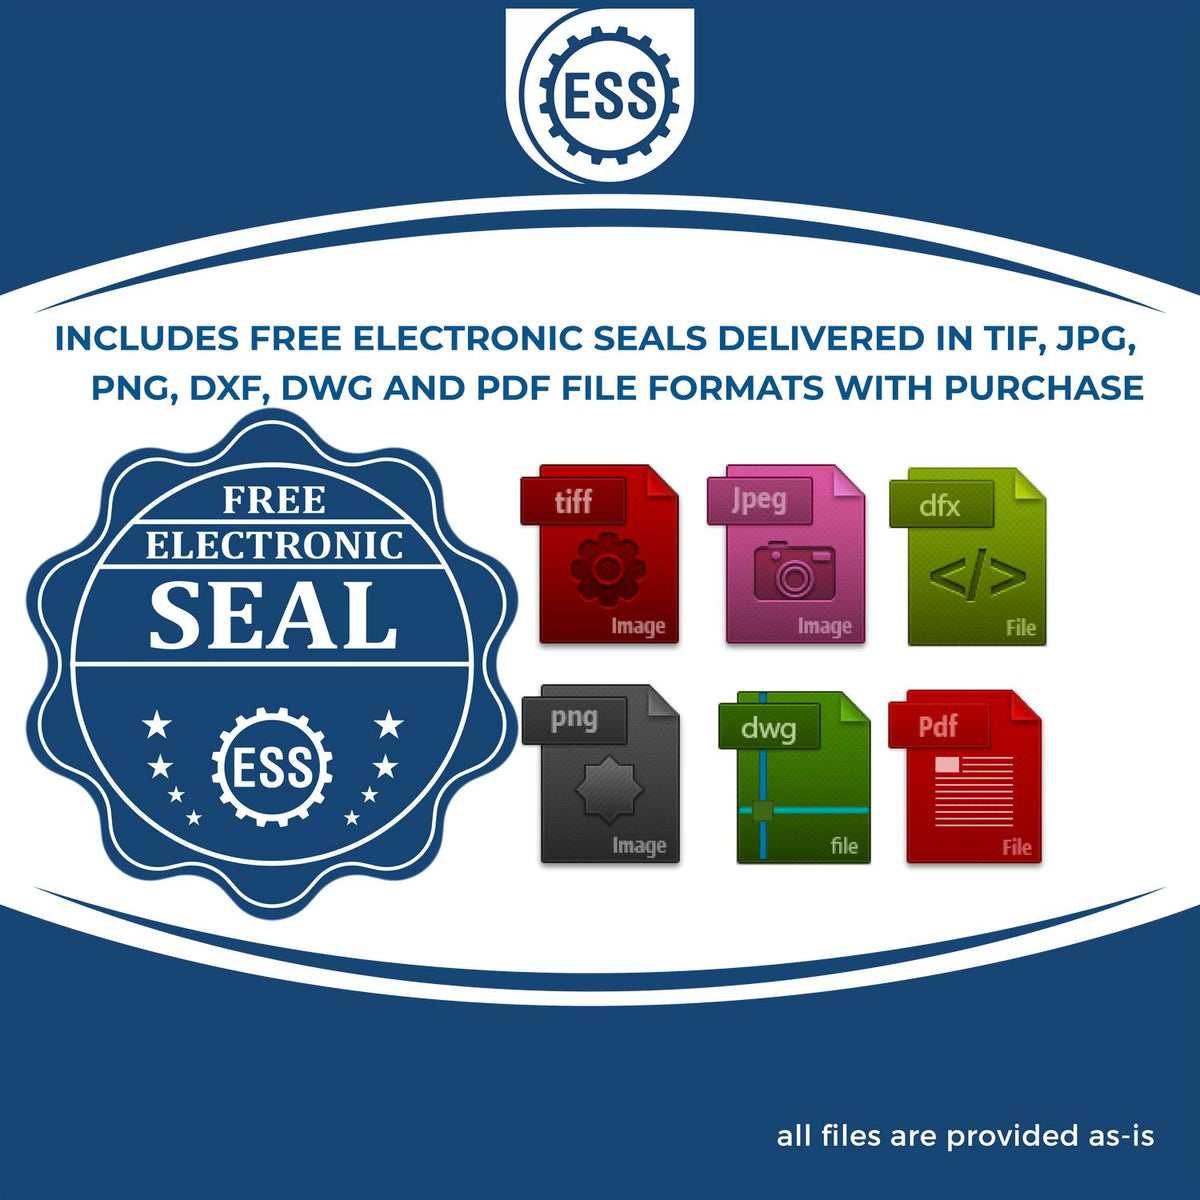 An infographic for the free electronic seal for the Wyoming Professional Geologist Seal Stamp illustrating the different file type icons such as DXF, DWG, TIF, JPG and PNG.